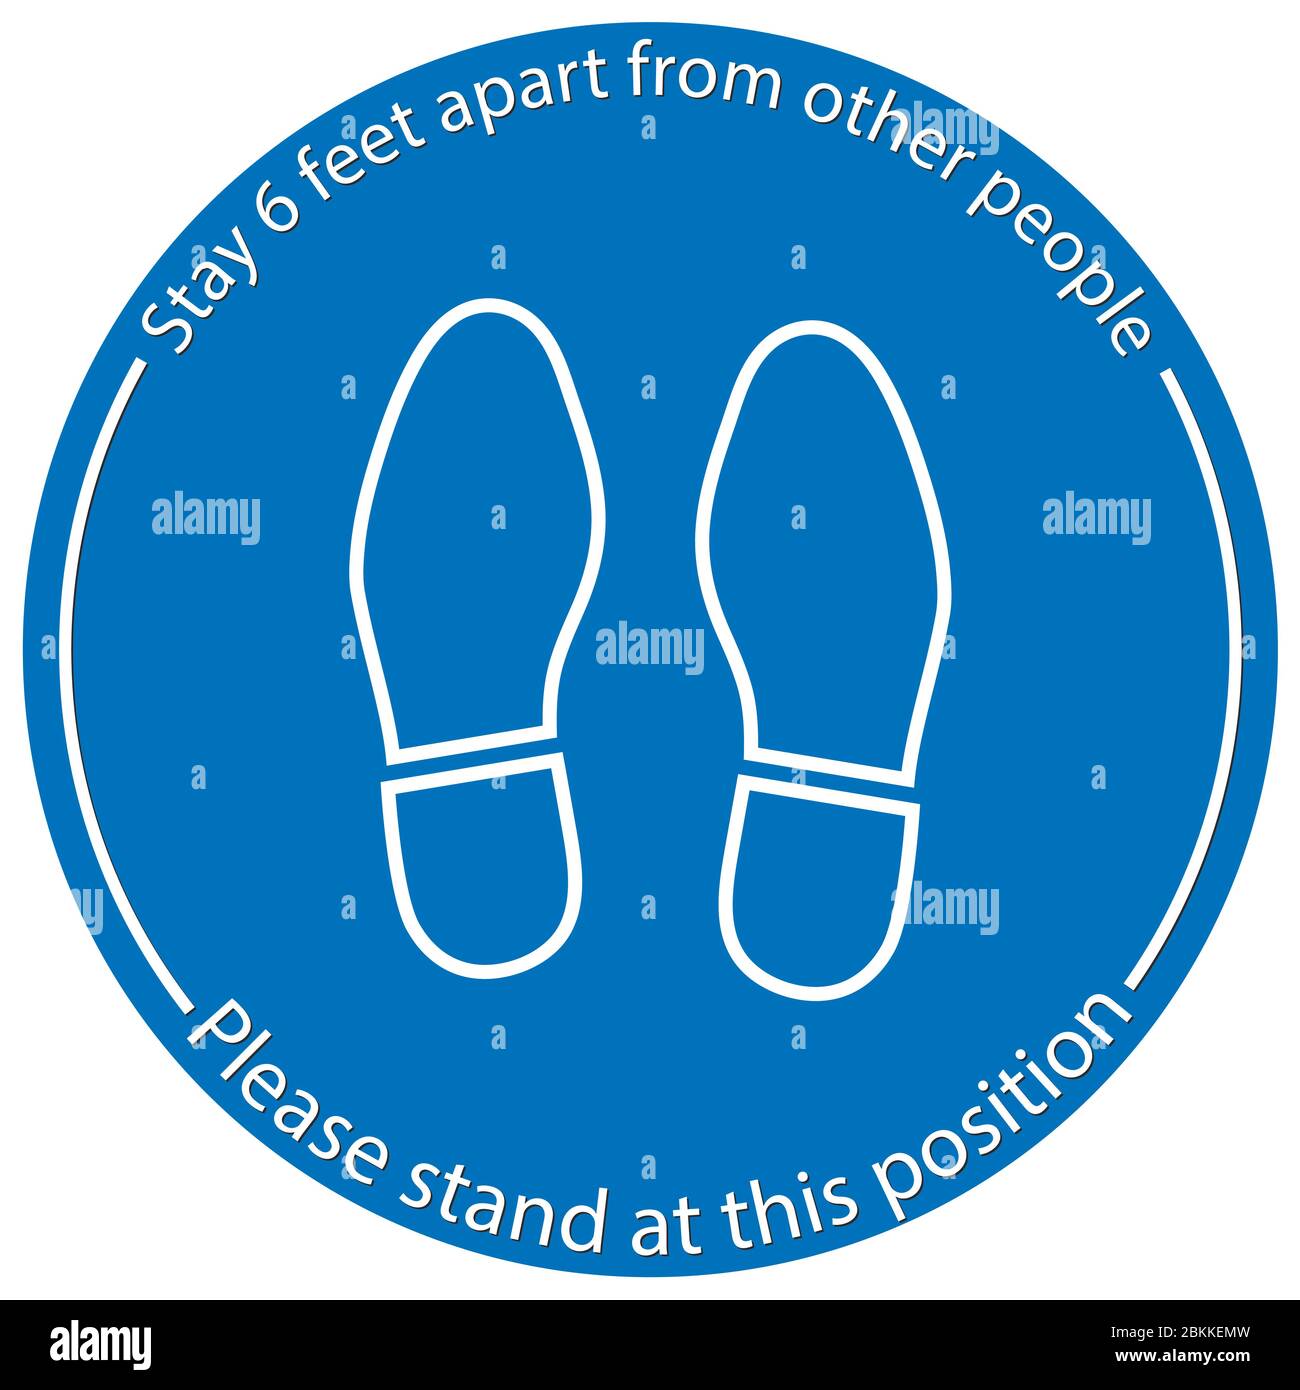 Foot Symbol Marking the standing position, the floor as markers for people to stand 6 feet apart, the practices put in place to enforce social distanc Stock Vector